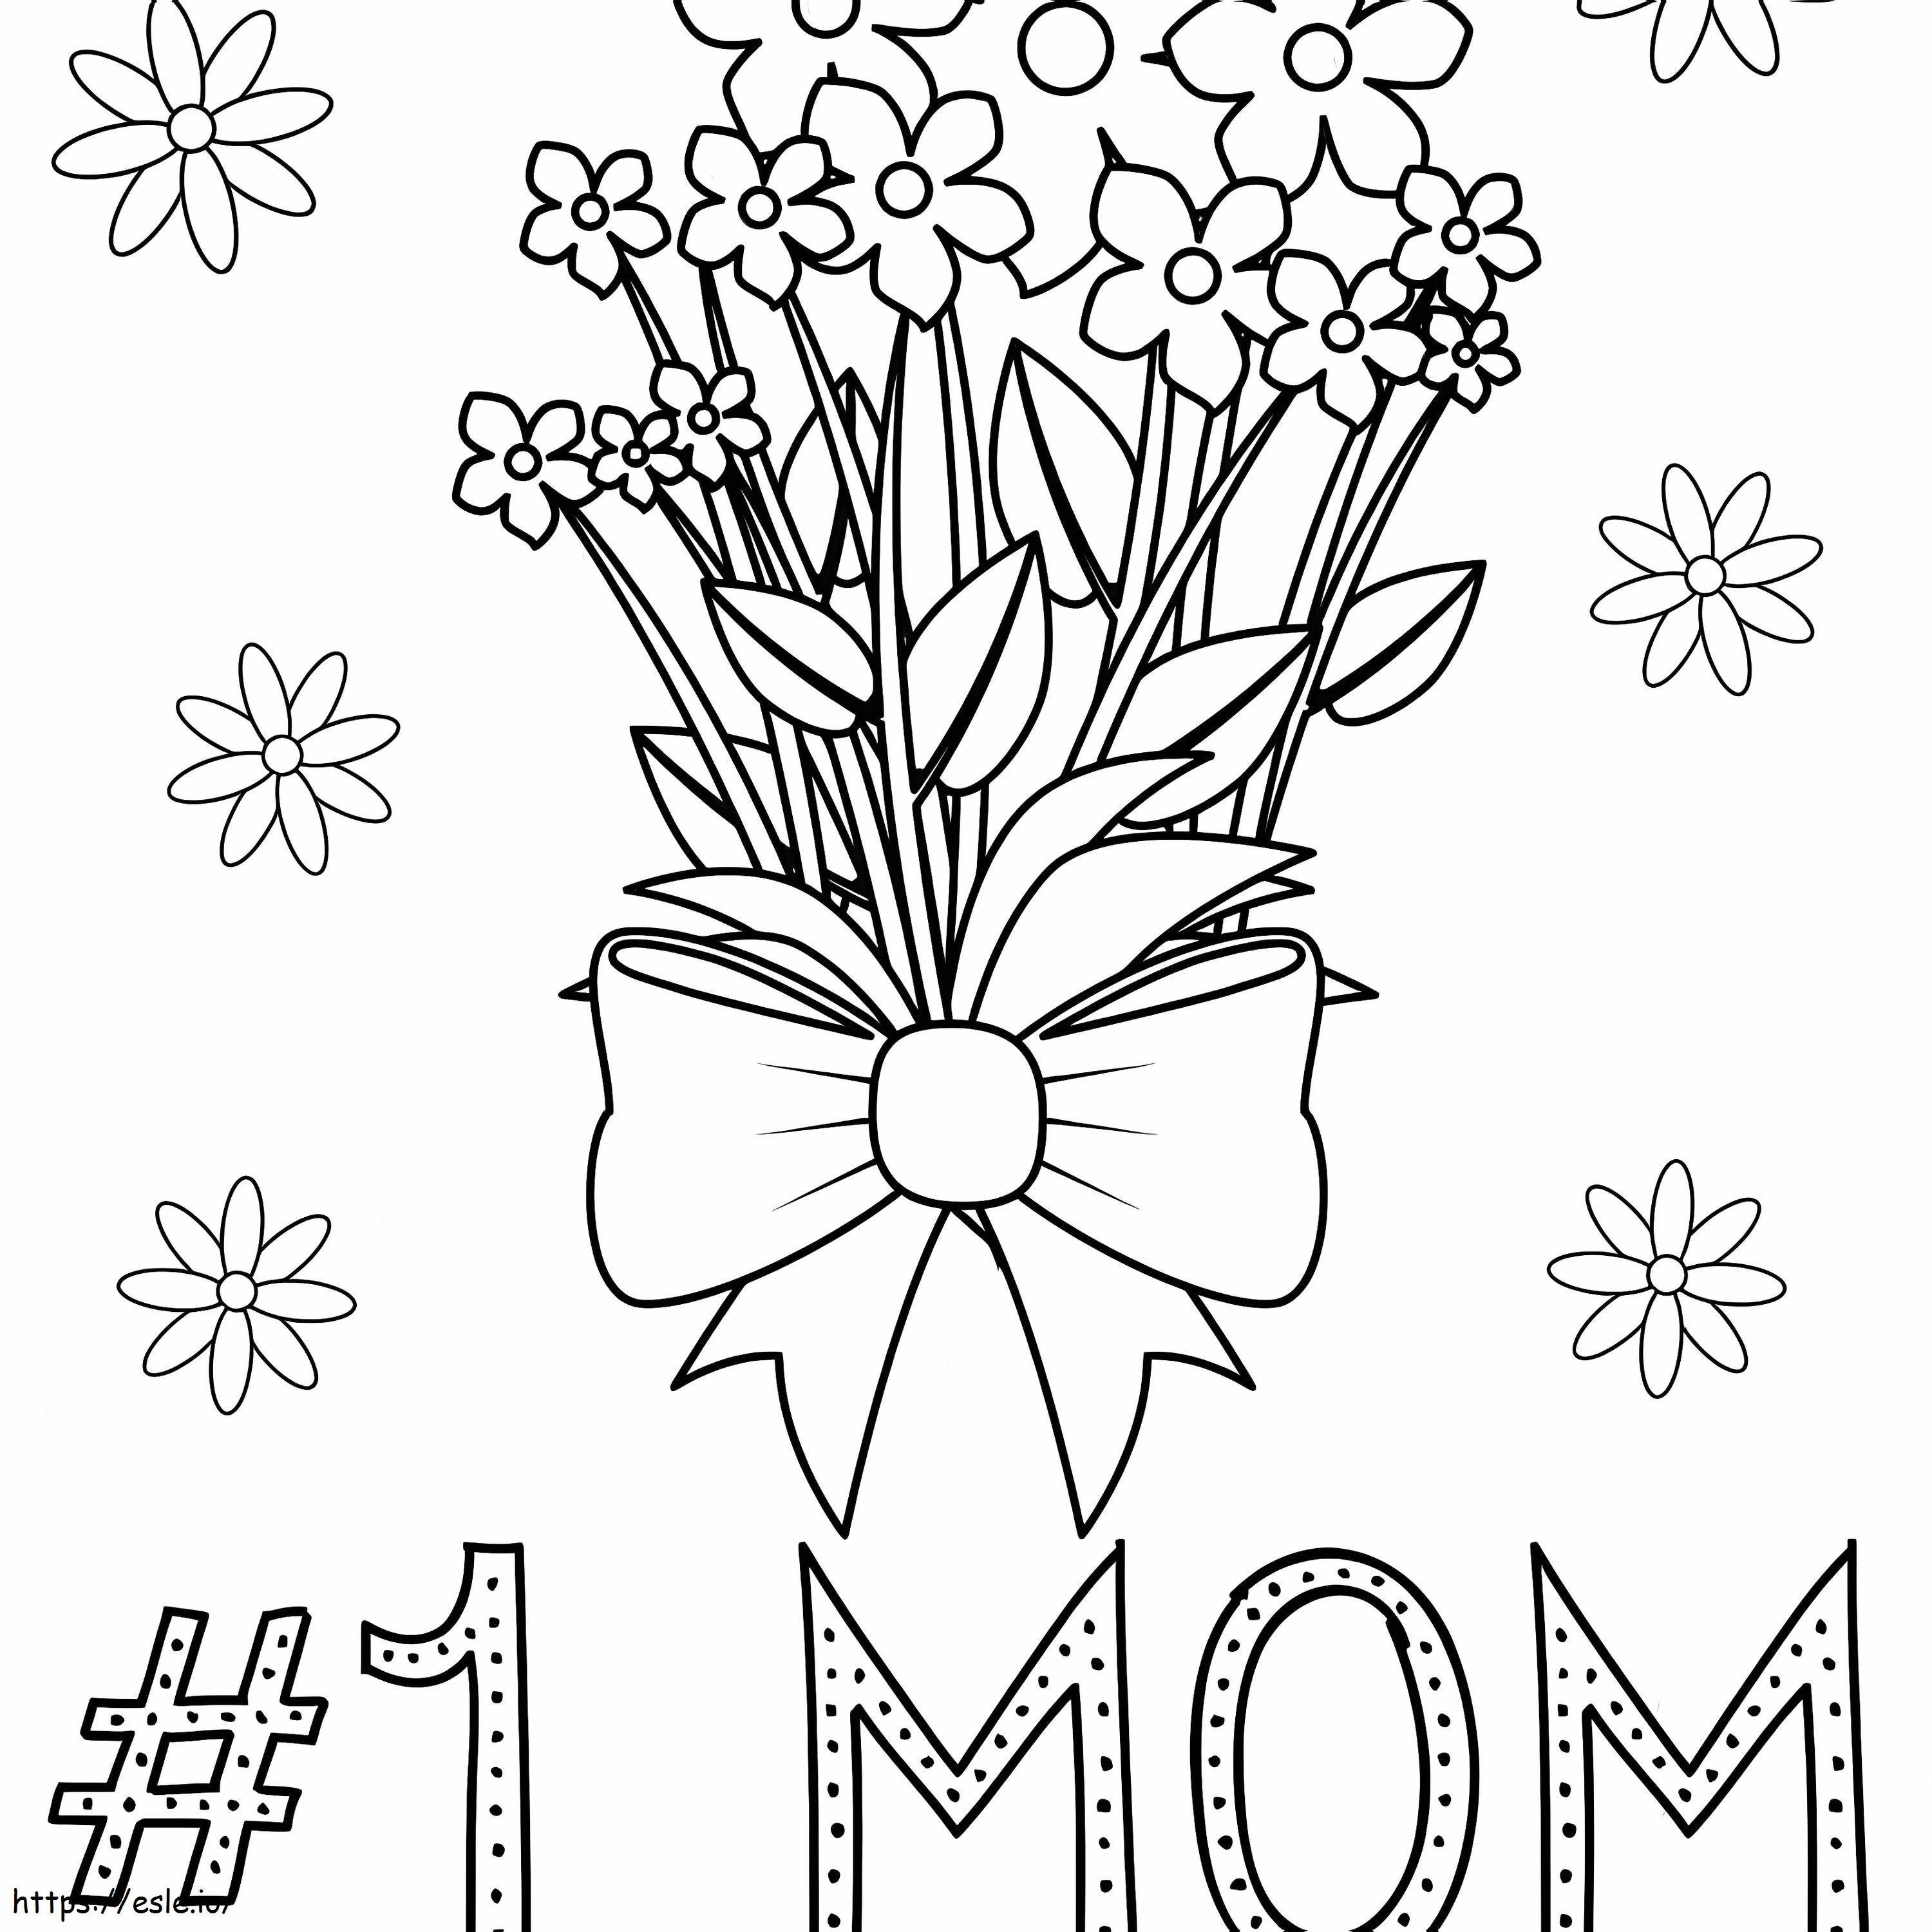 Flowers For Mom 1 coloring page